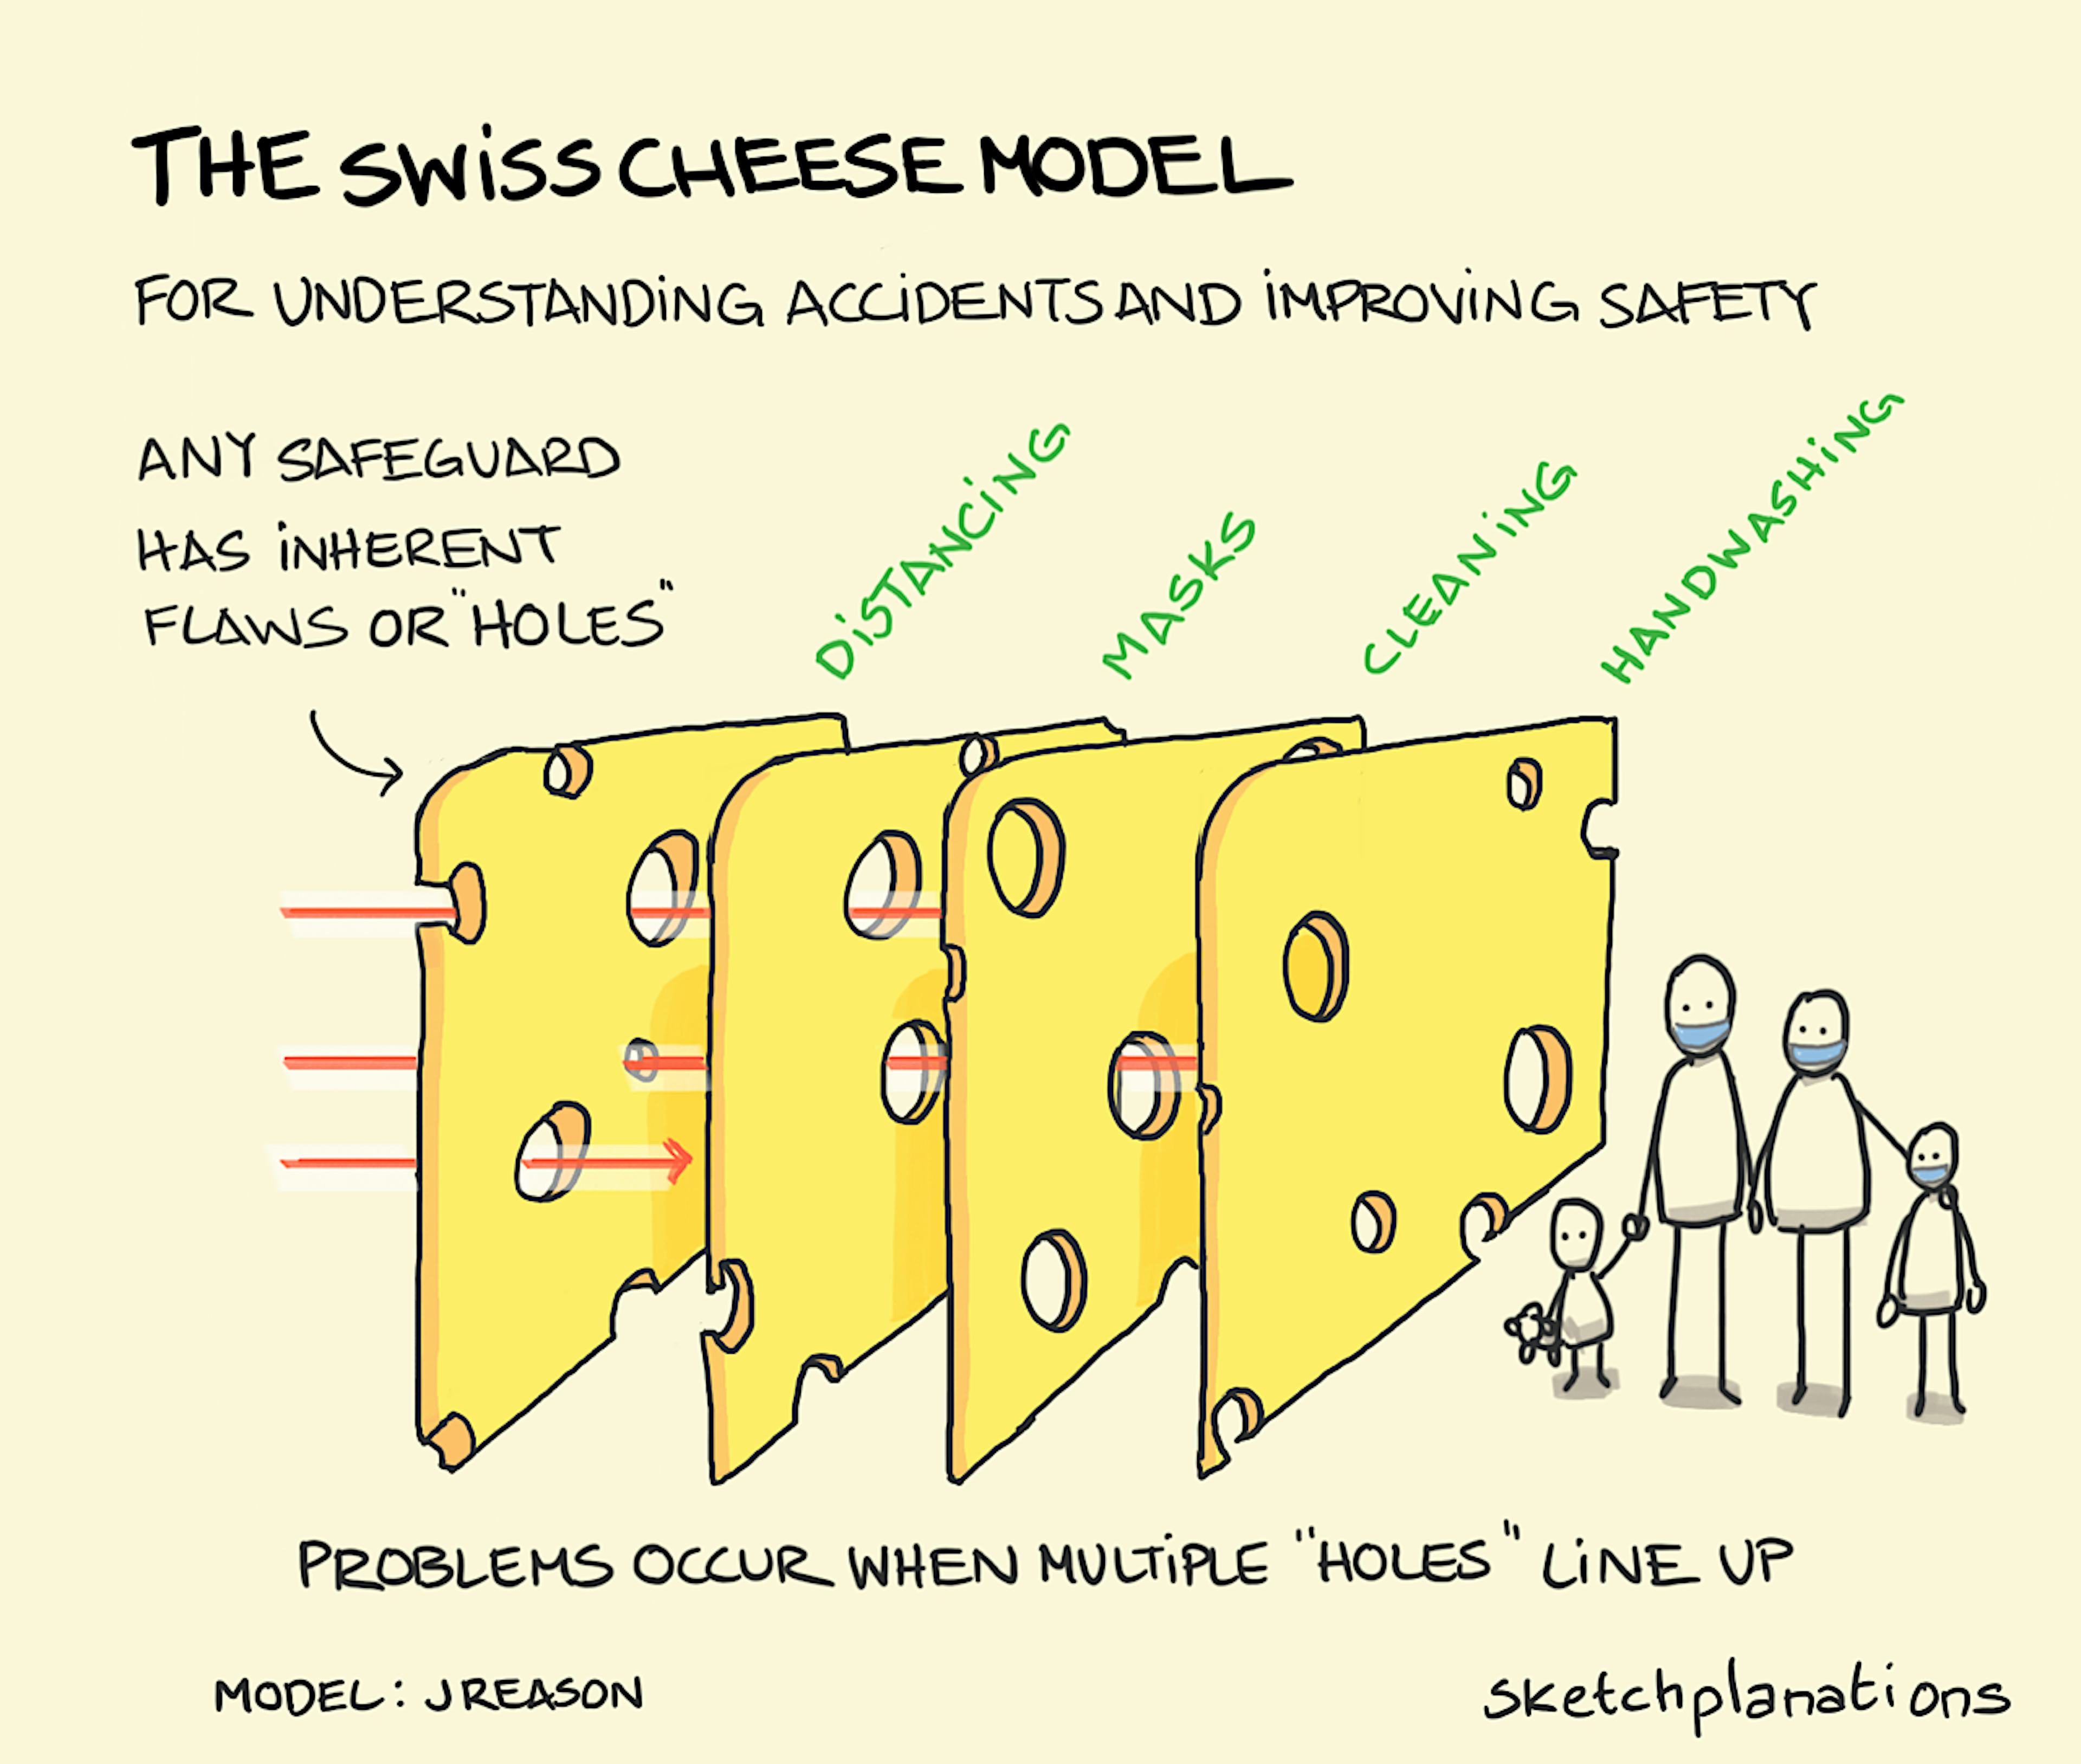 The Swiss Cheese Model illustration: A stack of 4 vertical Swiss cheese slices act as safeguarding protective layers, keeping a young family on the right of the stack safe from the harmful elements approaching from the left. Although the holes in the cheese slices allow penetration through some of the barrier, the multiple layers, with unevenly distributed holes,  prevent harmful elements breaking all the way through.  